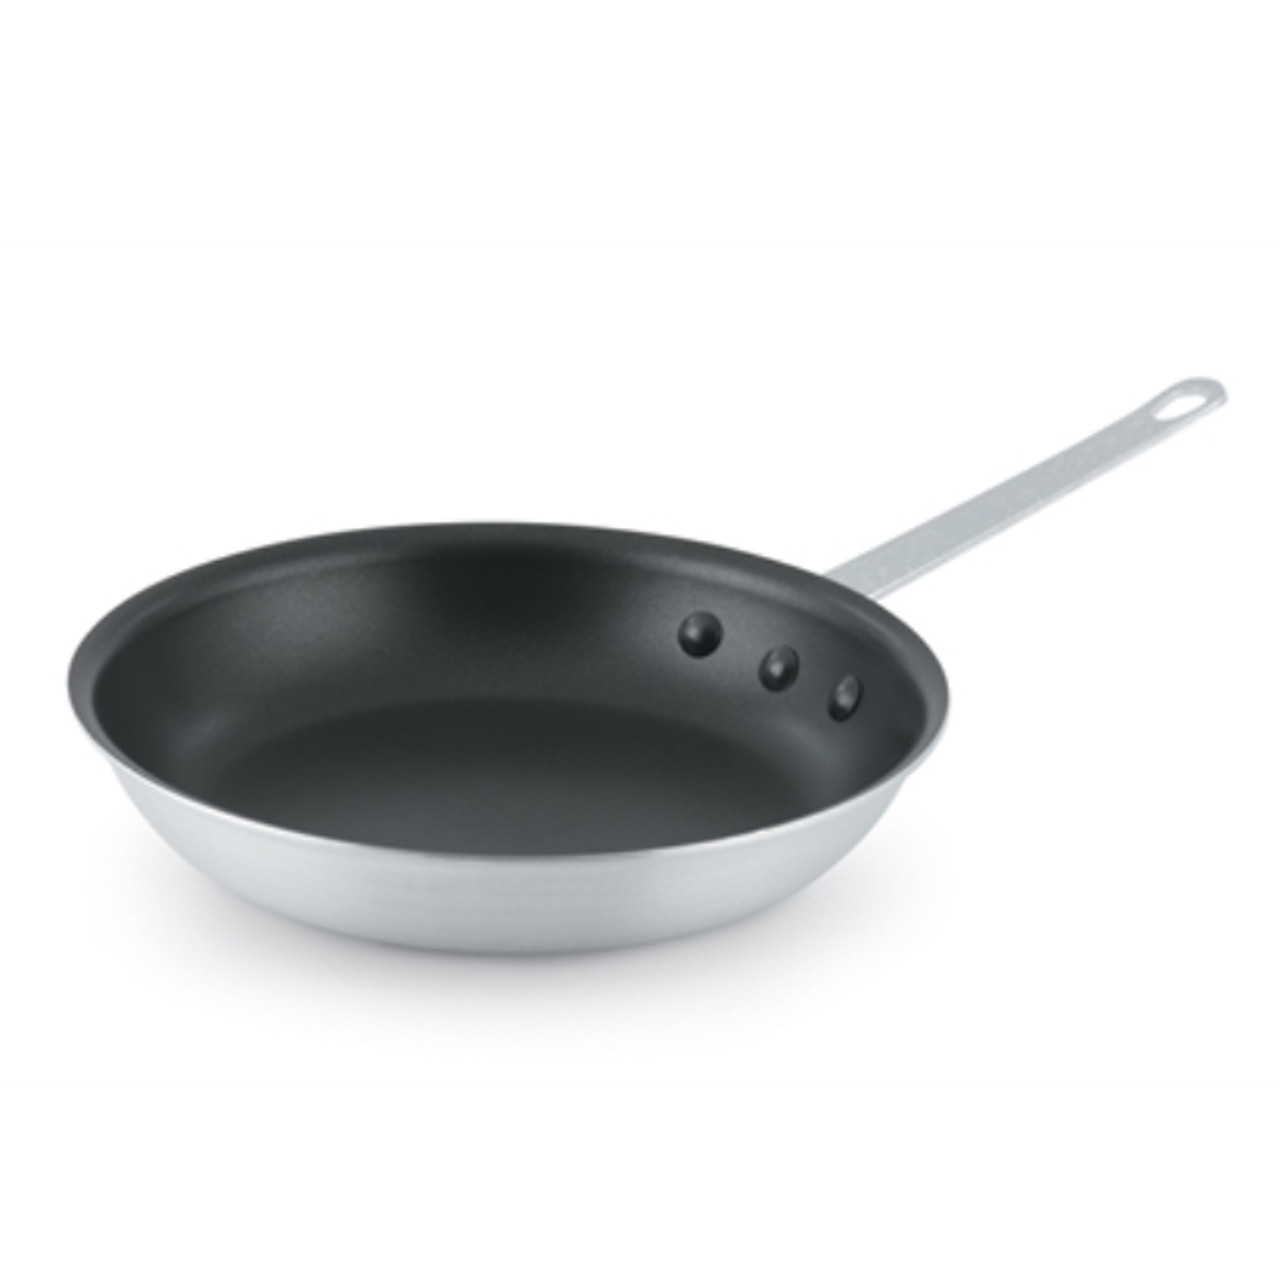 Vollrath Arkadia 12 Aluminum Non-Stick Fry Pan with Black Silicone Handle